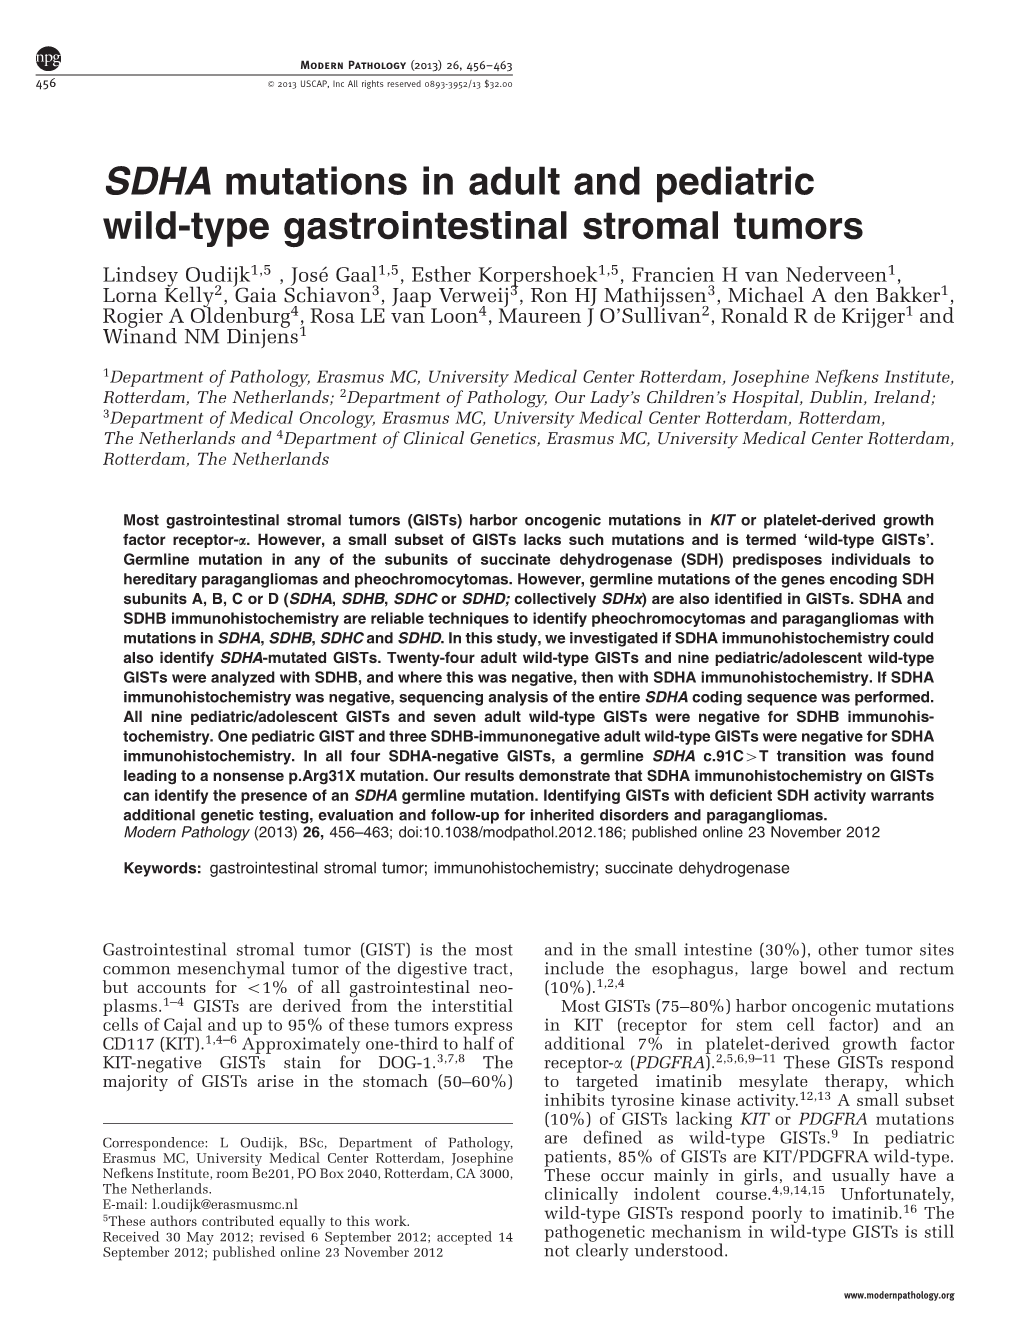 SDHA Mutations in Adult and Pediatric Wild-Type Gastrointestinal Stromal